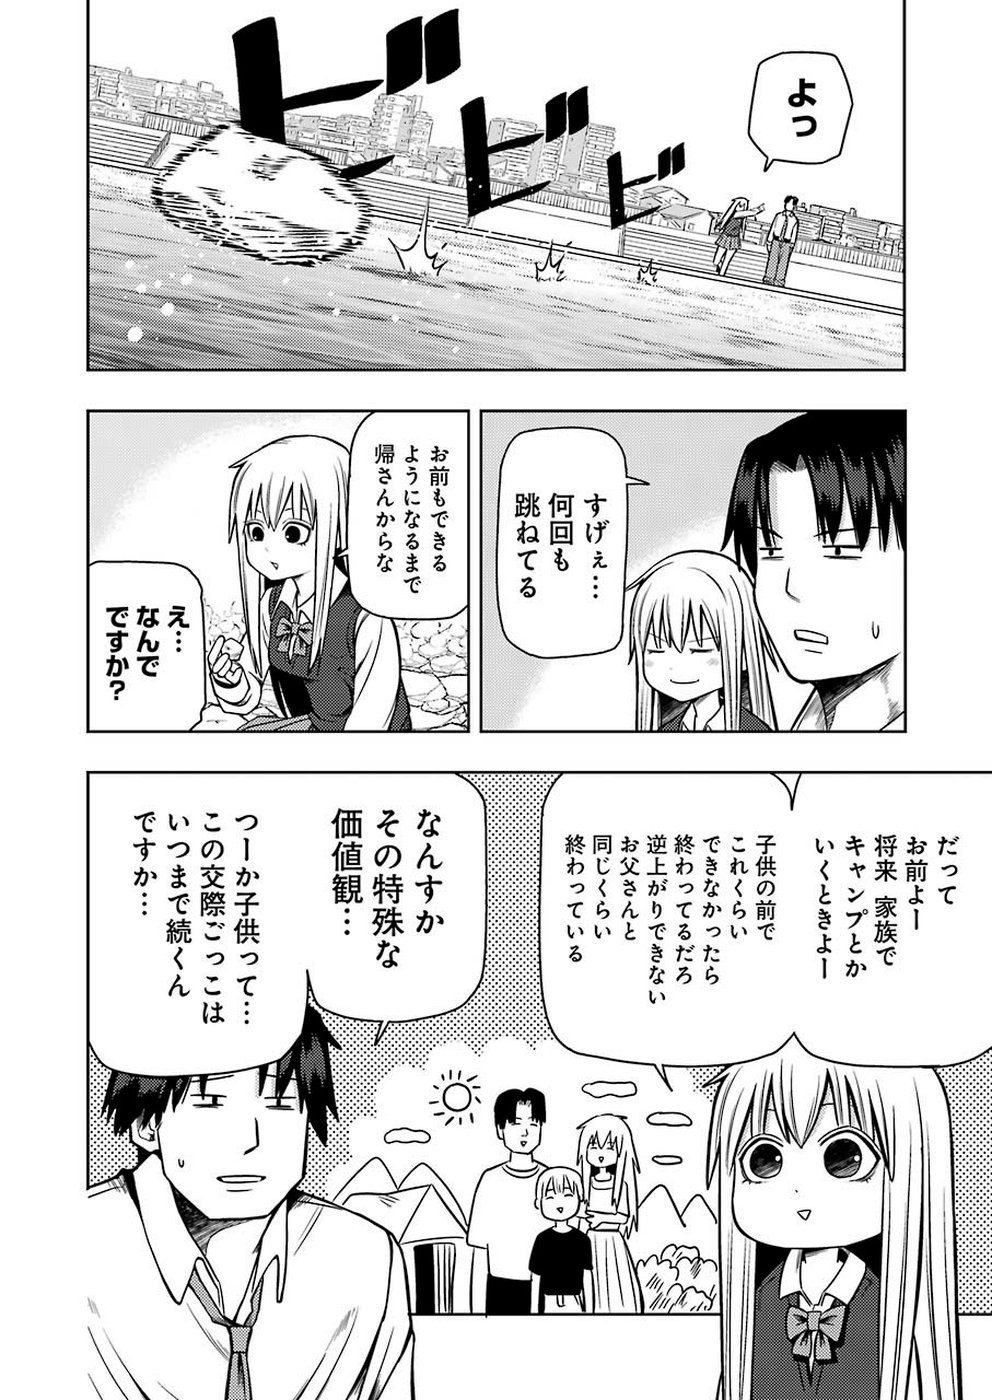 + Tic Nee-san - Chapter 194 - Page 2